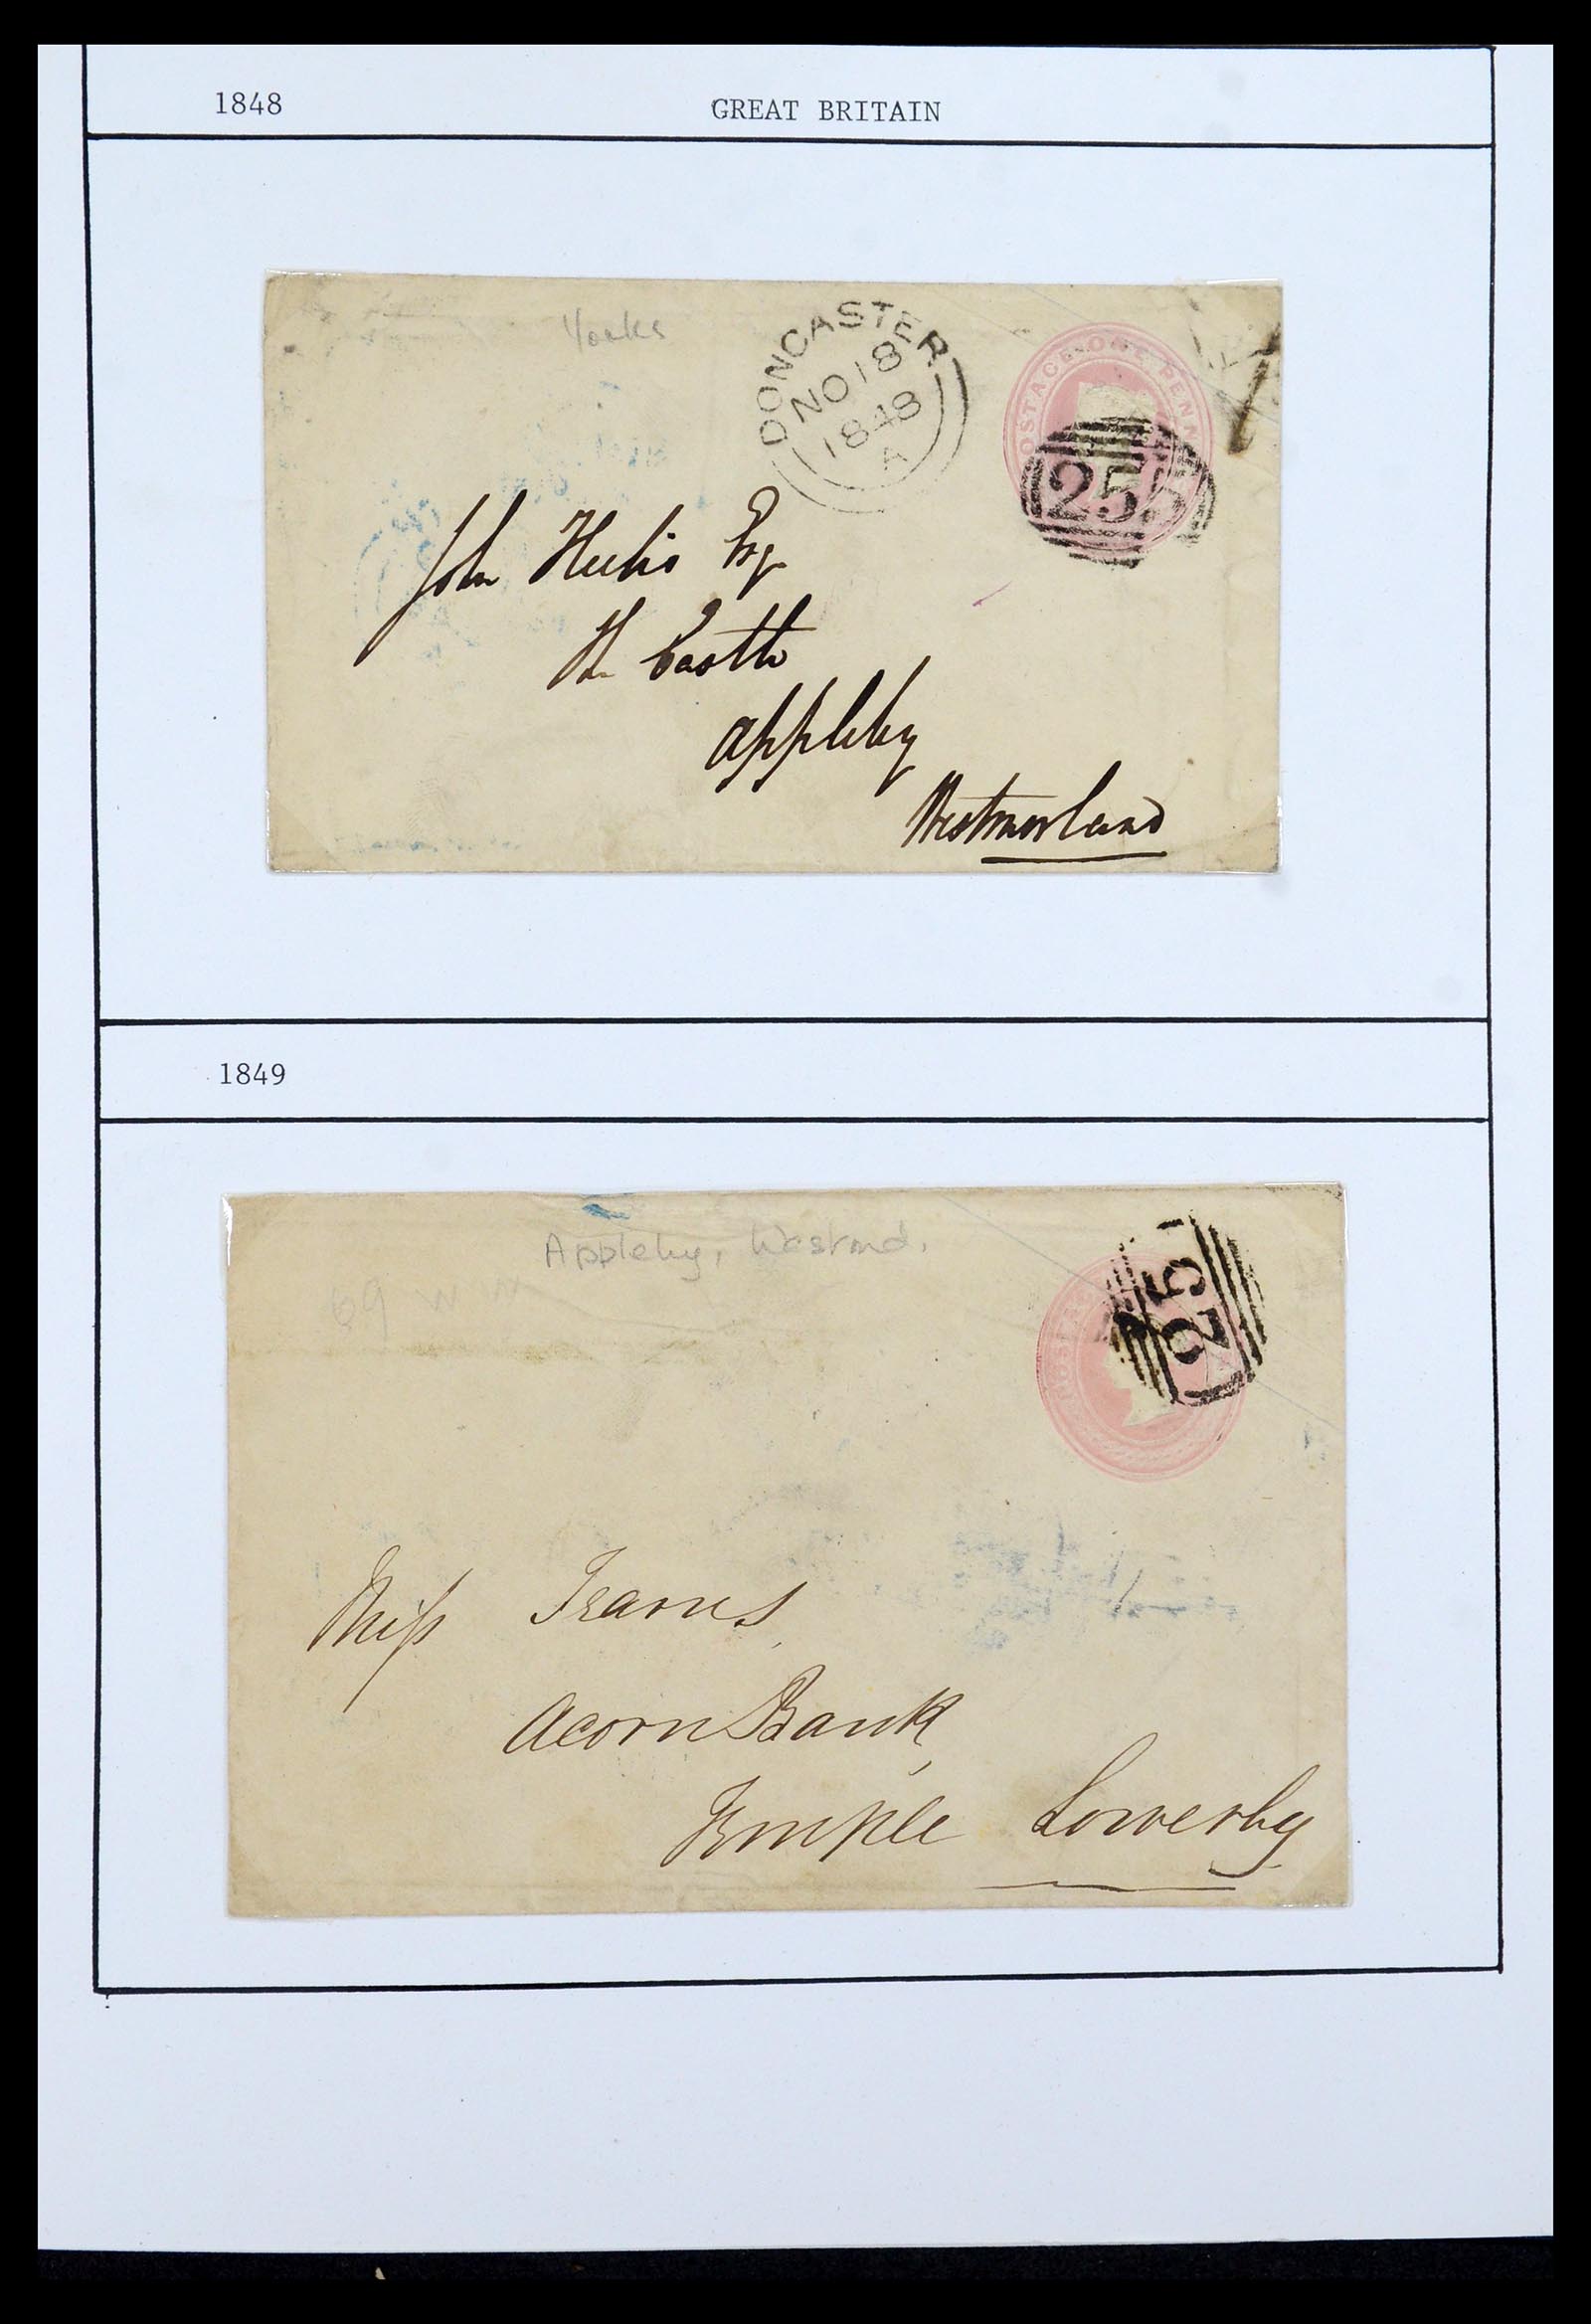 36309 001 - Stamp collection 36309 Great Britain covers 1848-1949.